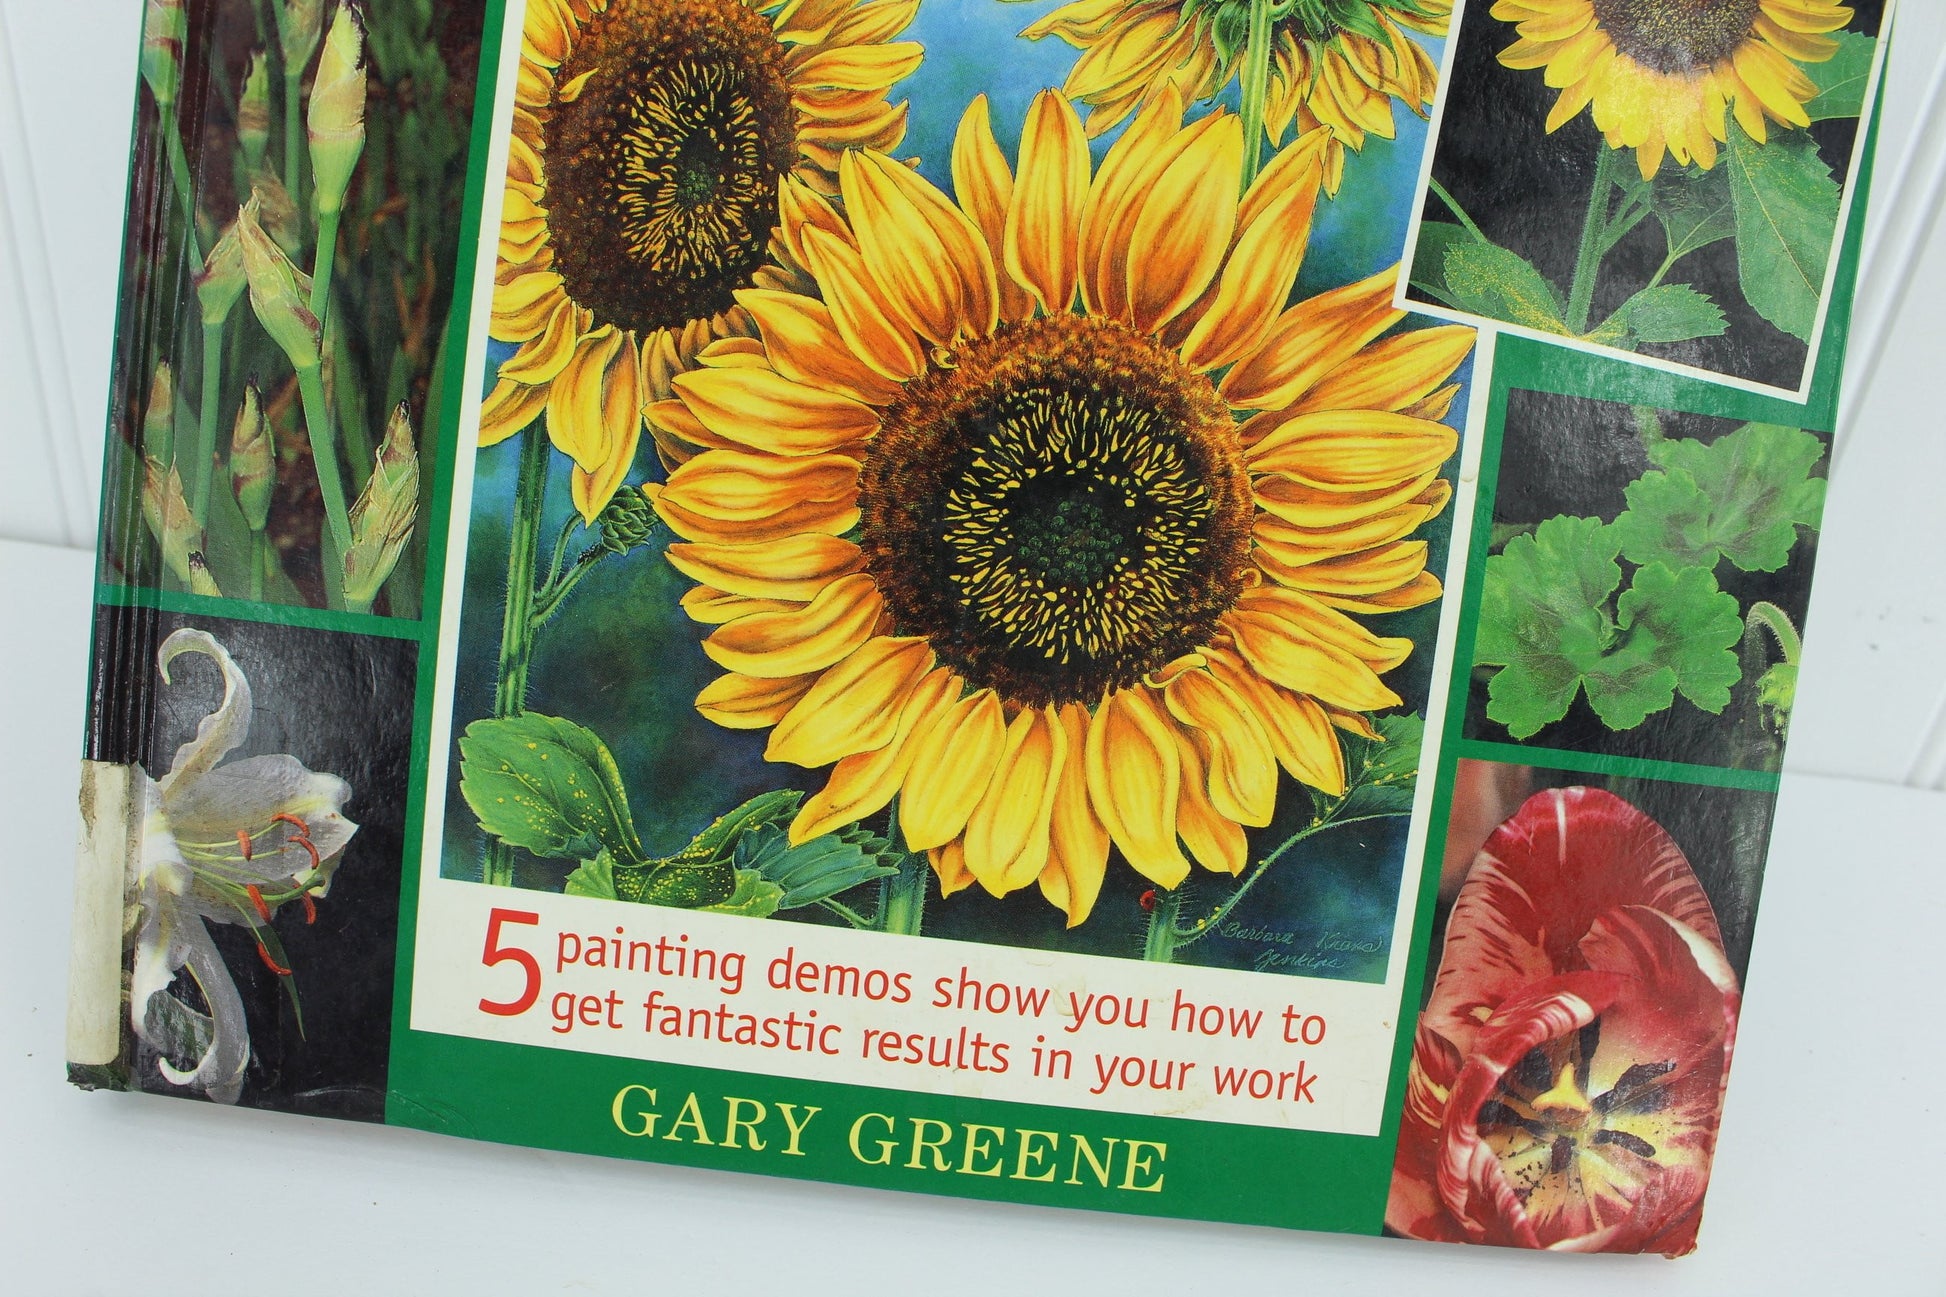 Gary Greene Artist's Photo Reference Flowers 500+ Photos & How To 5 painting demos